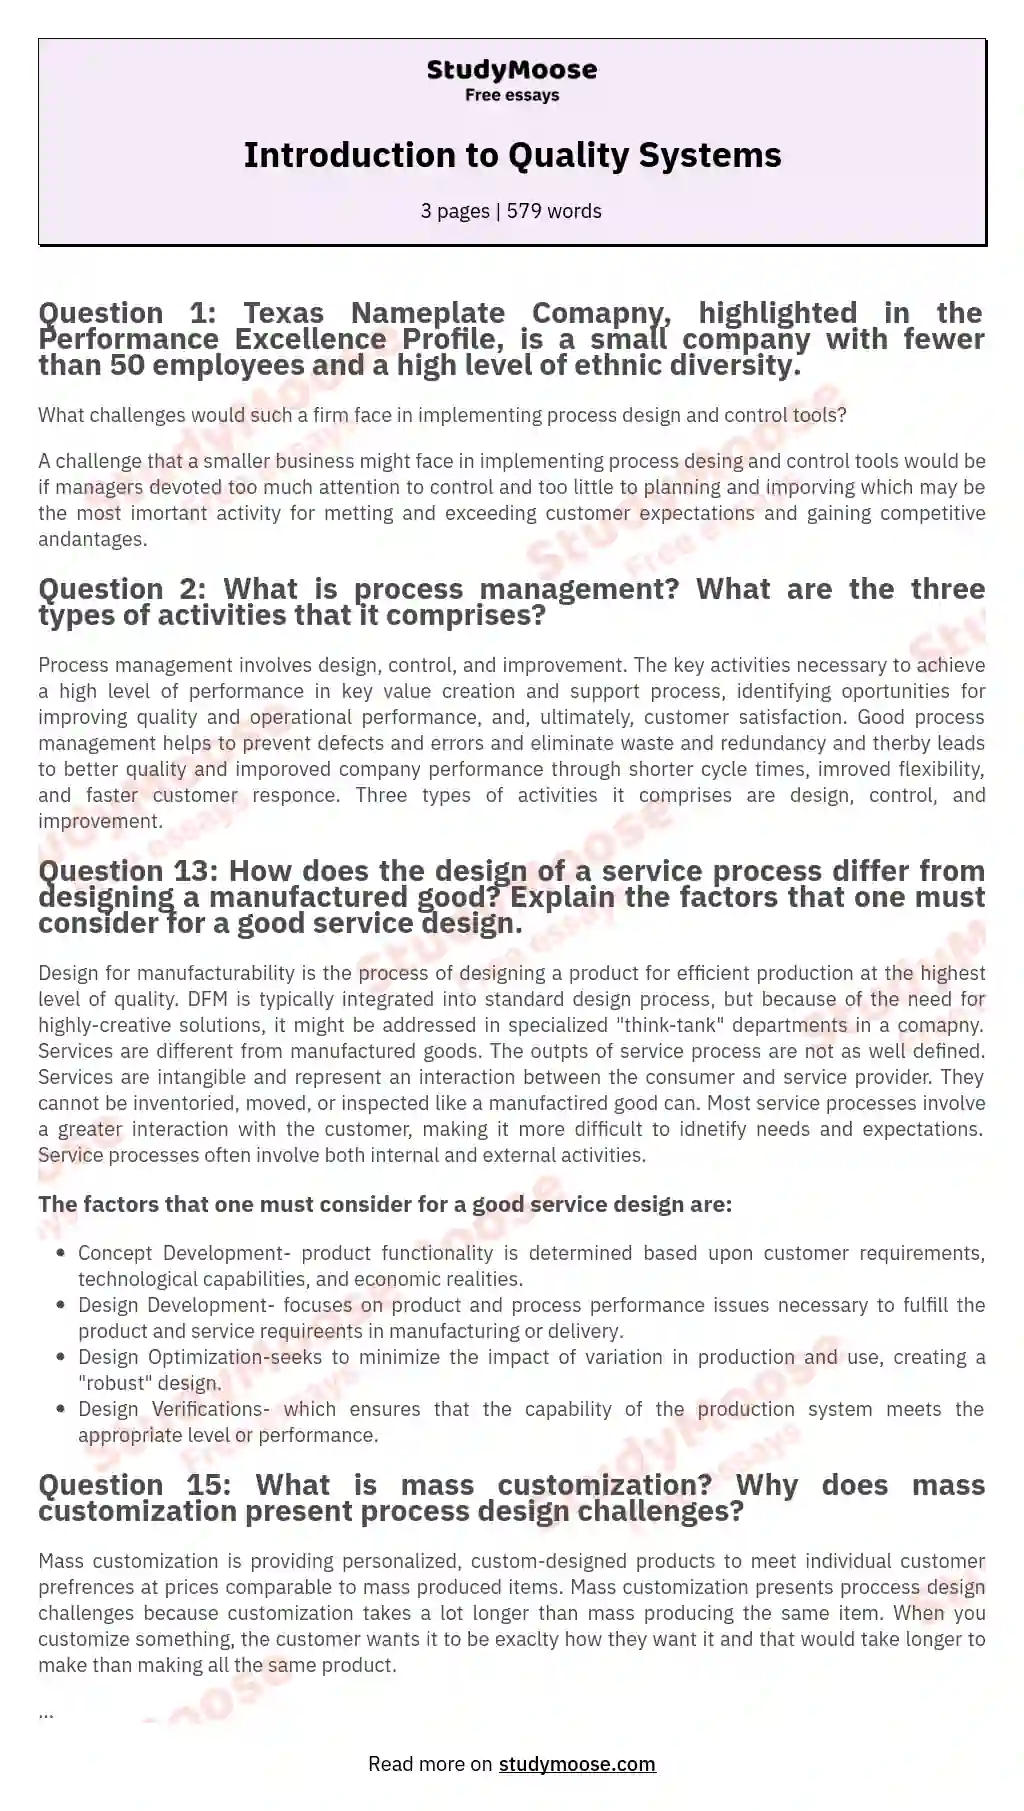 Introduction to Quality Systems essay